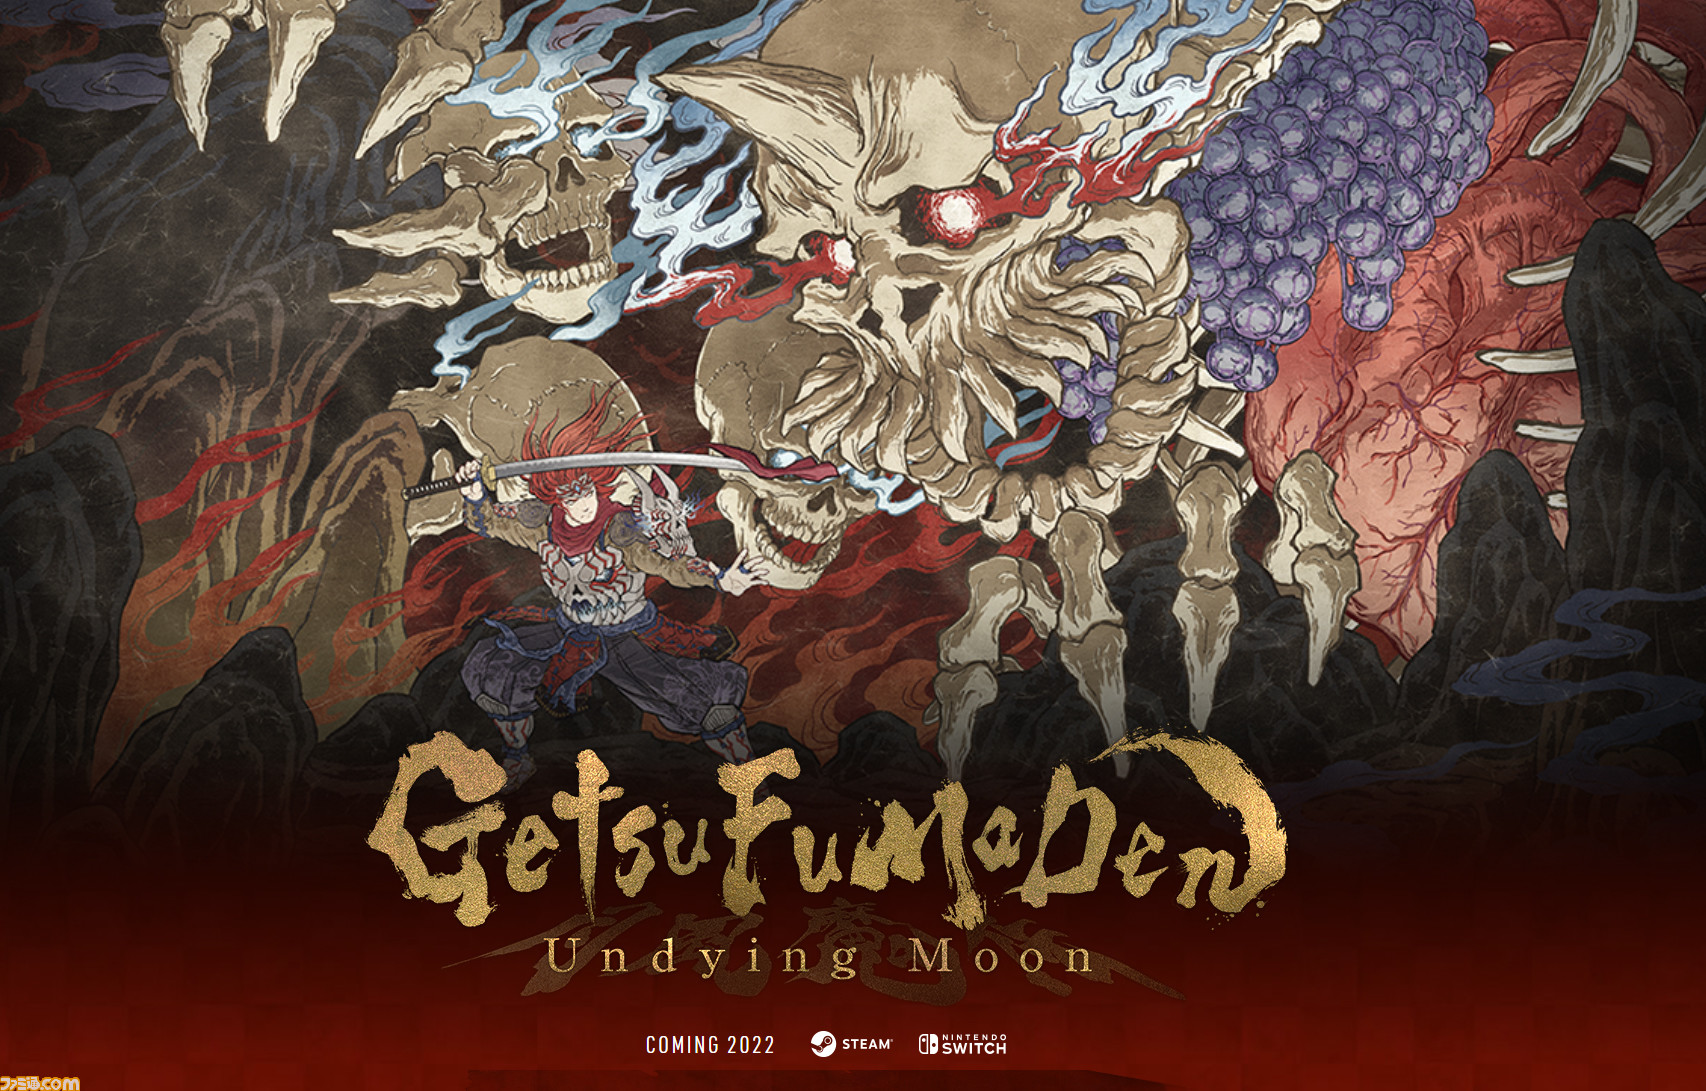 GetsuFumaDen Undying Moon 月風魔伝 switch - 家庭用ゲームソフト